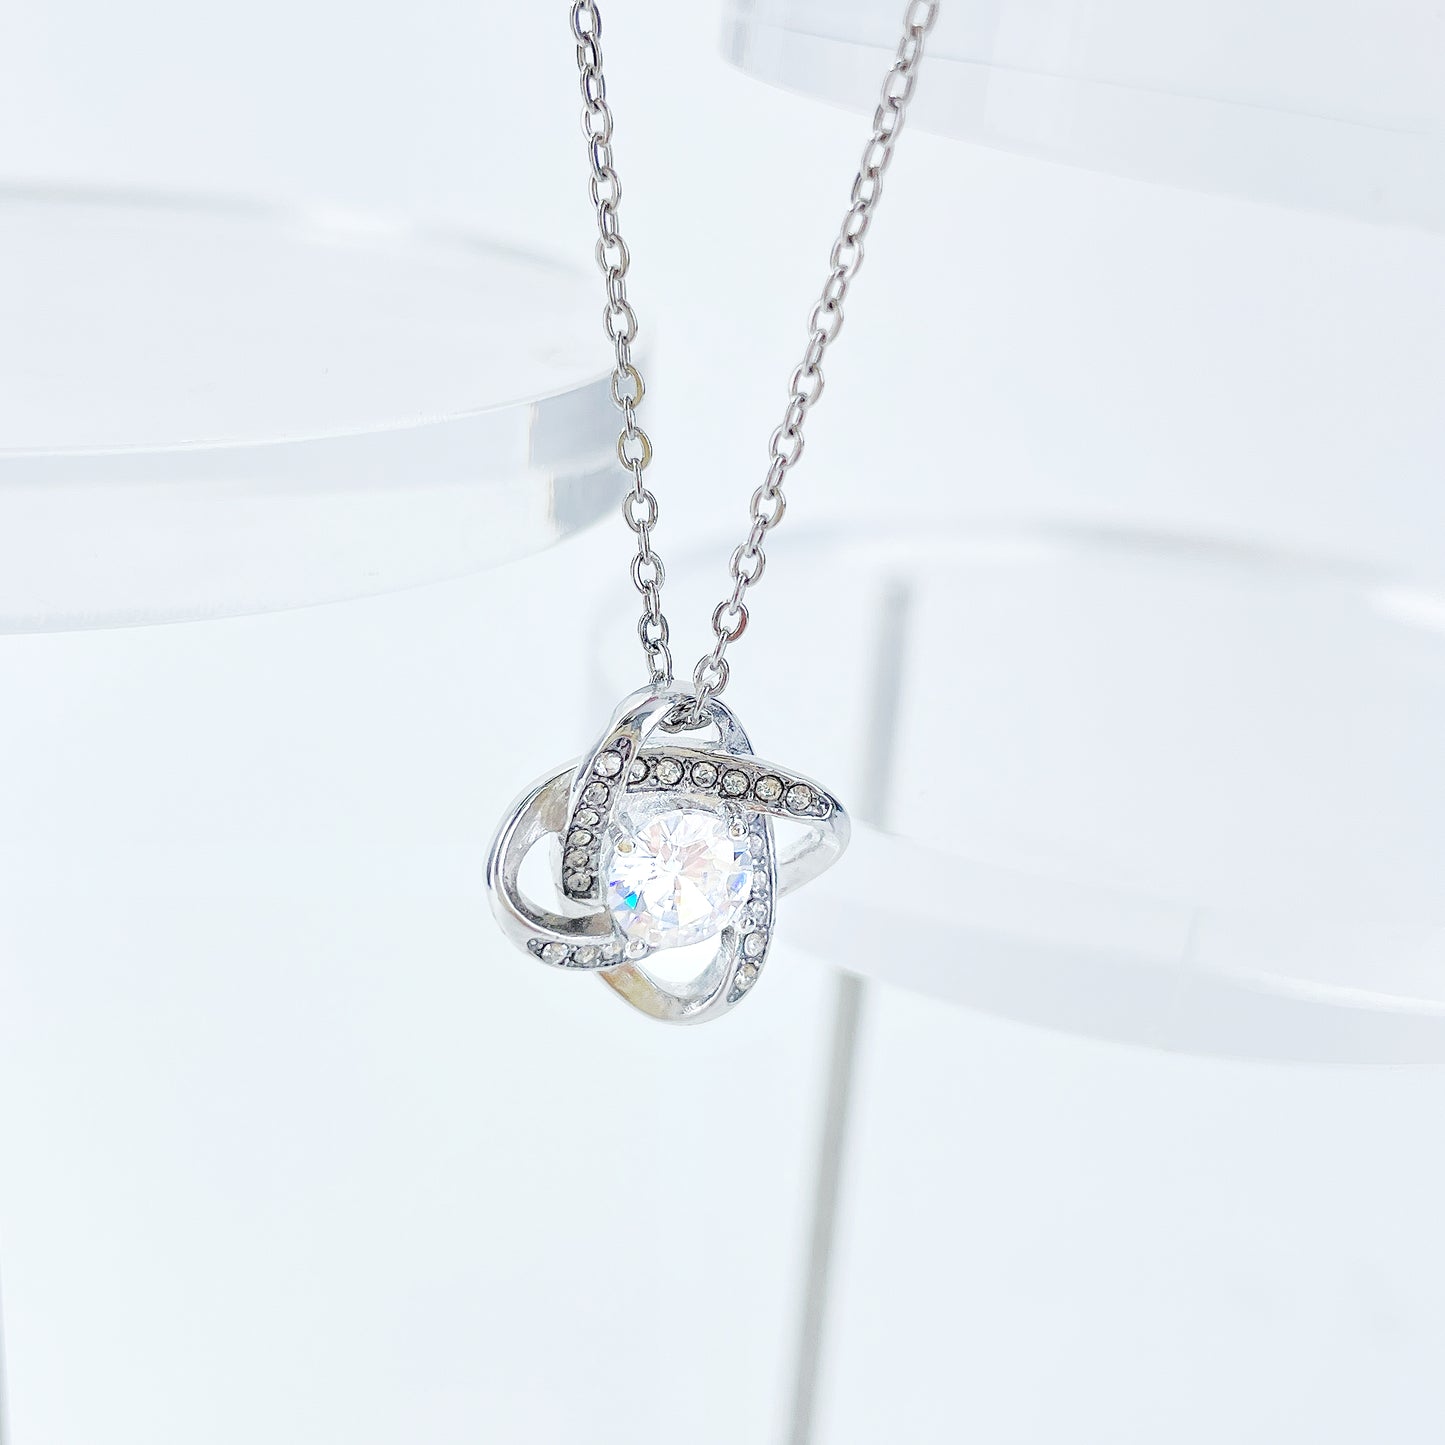 RFB0255  Eternal Love necklace